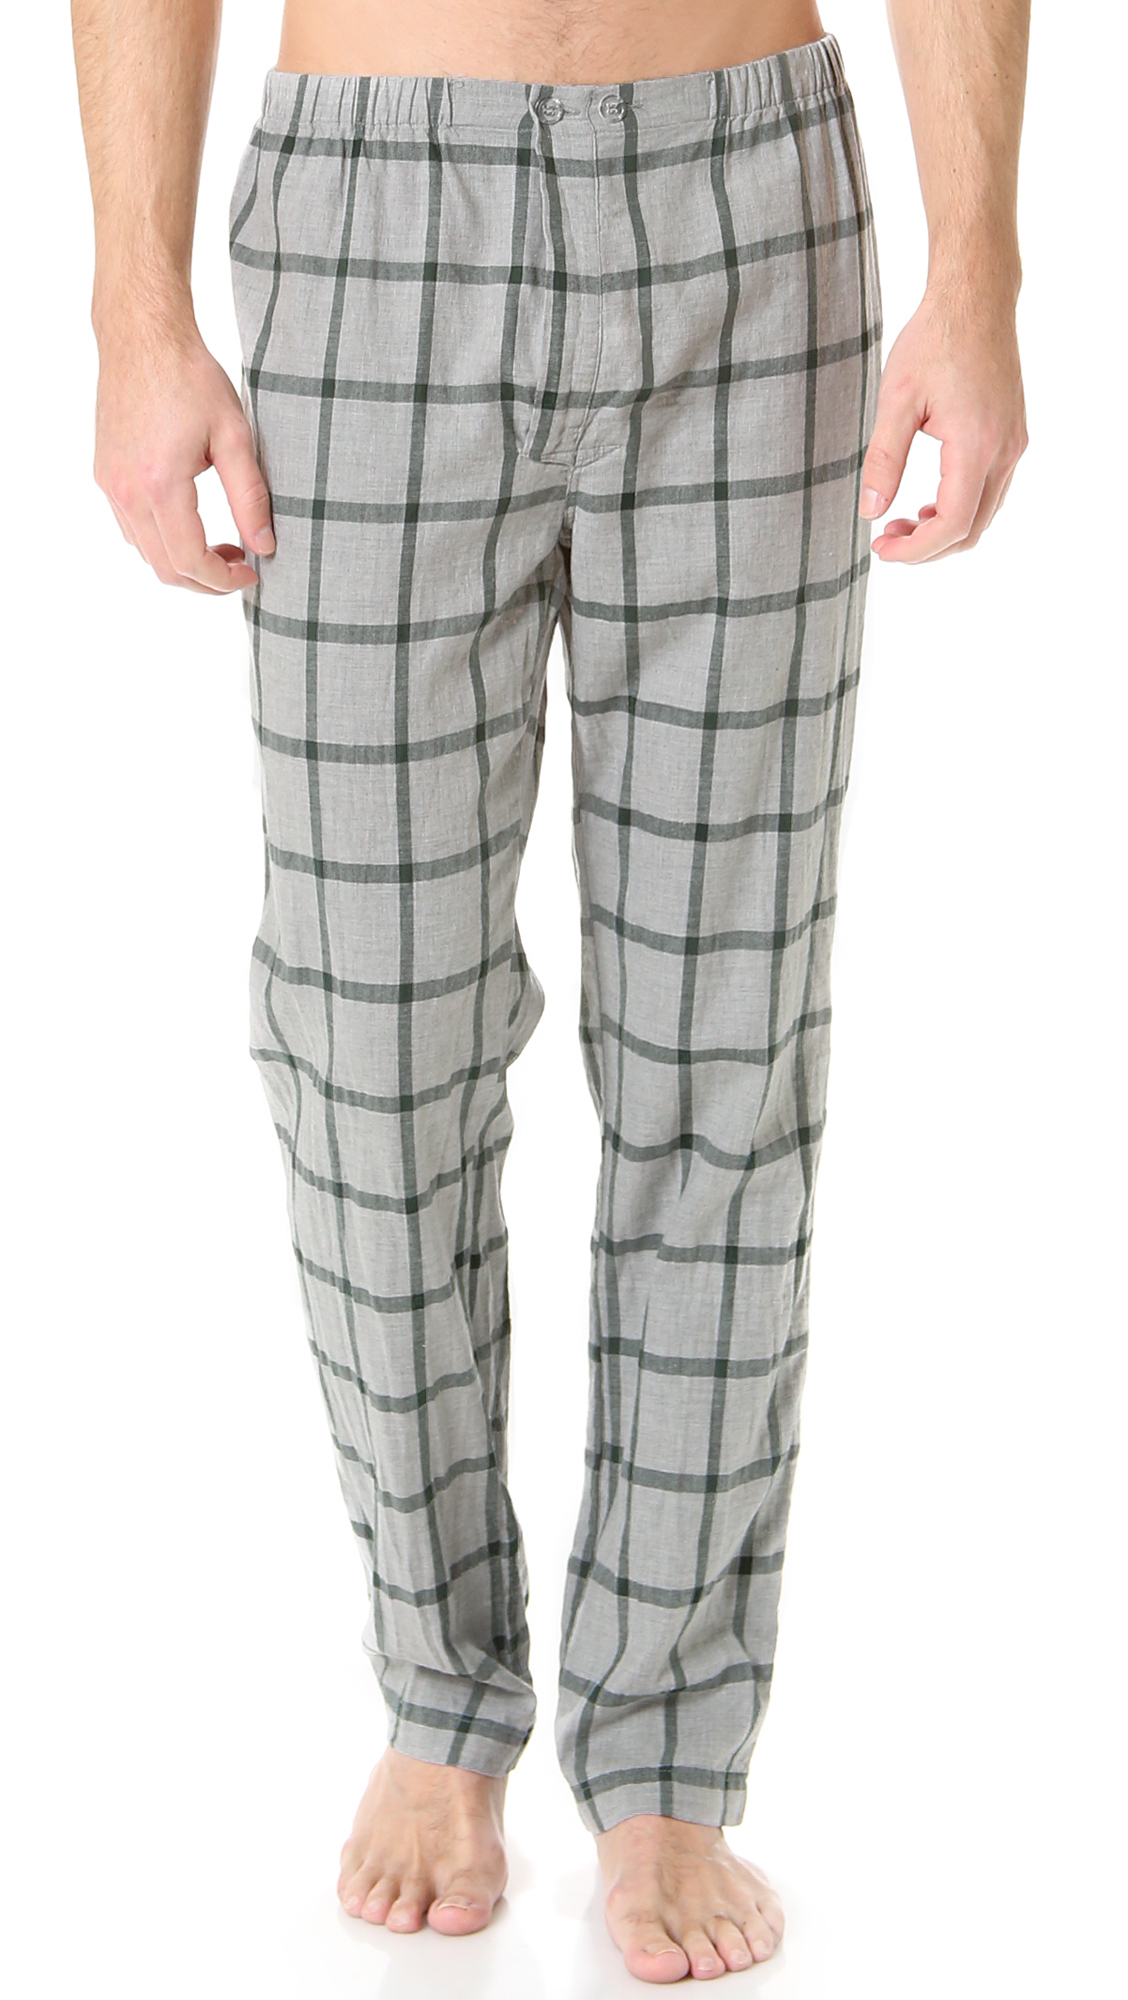 Lyst - Steven Alan Brushed Check Pajama Pants in Green for Men